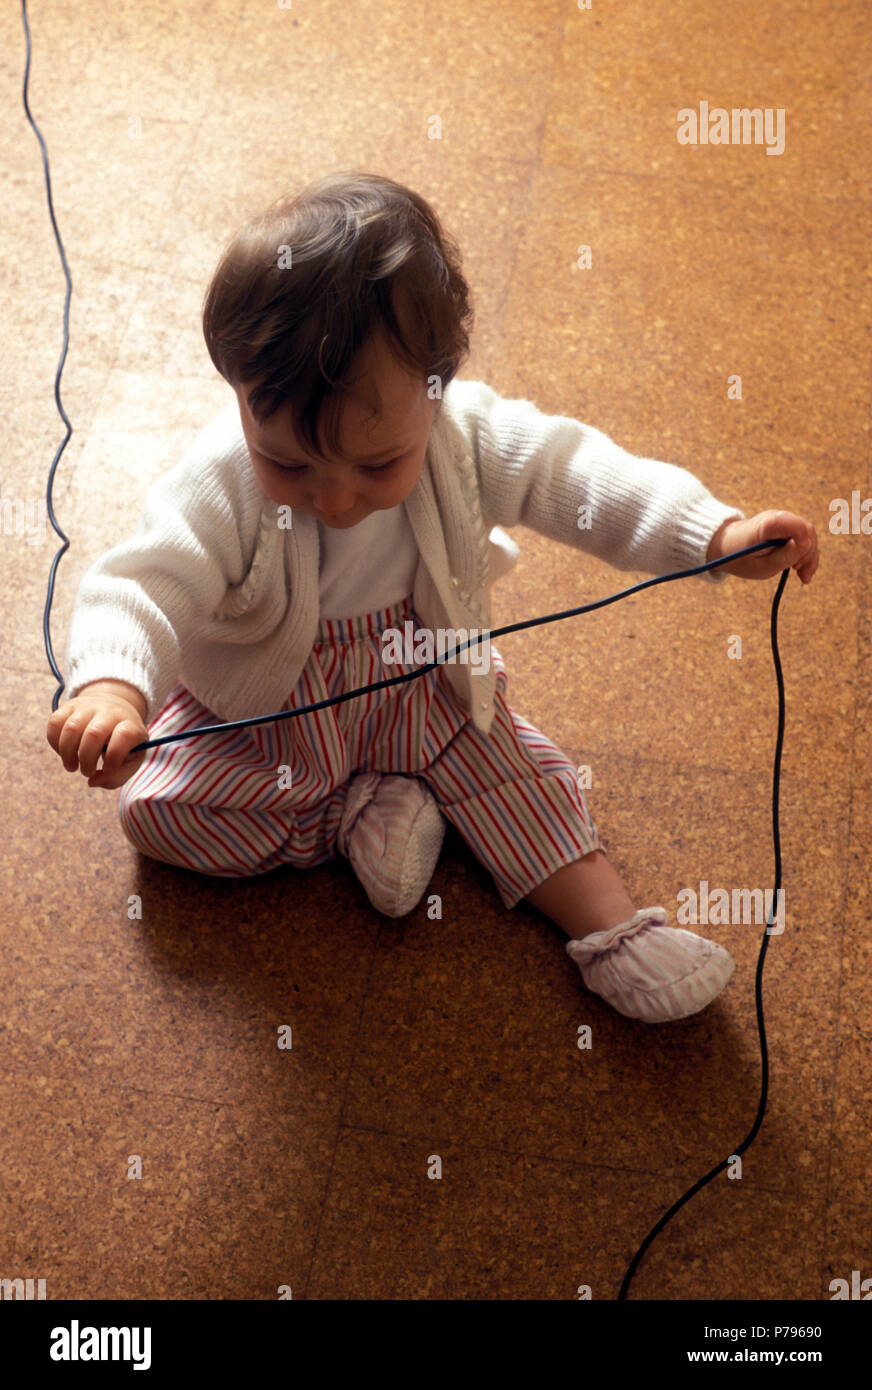 baby sitting on floor playing with electric cable in danger of electrocution Stock Photo